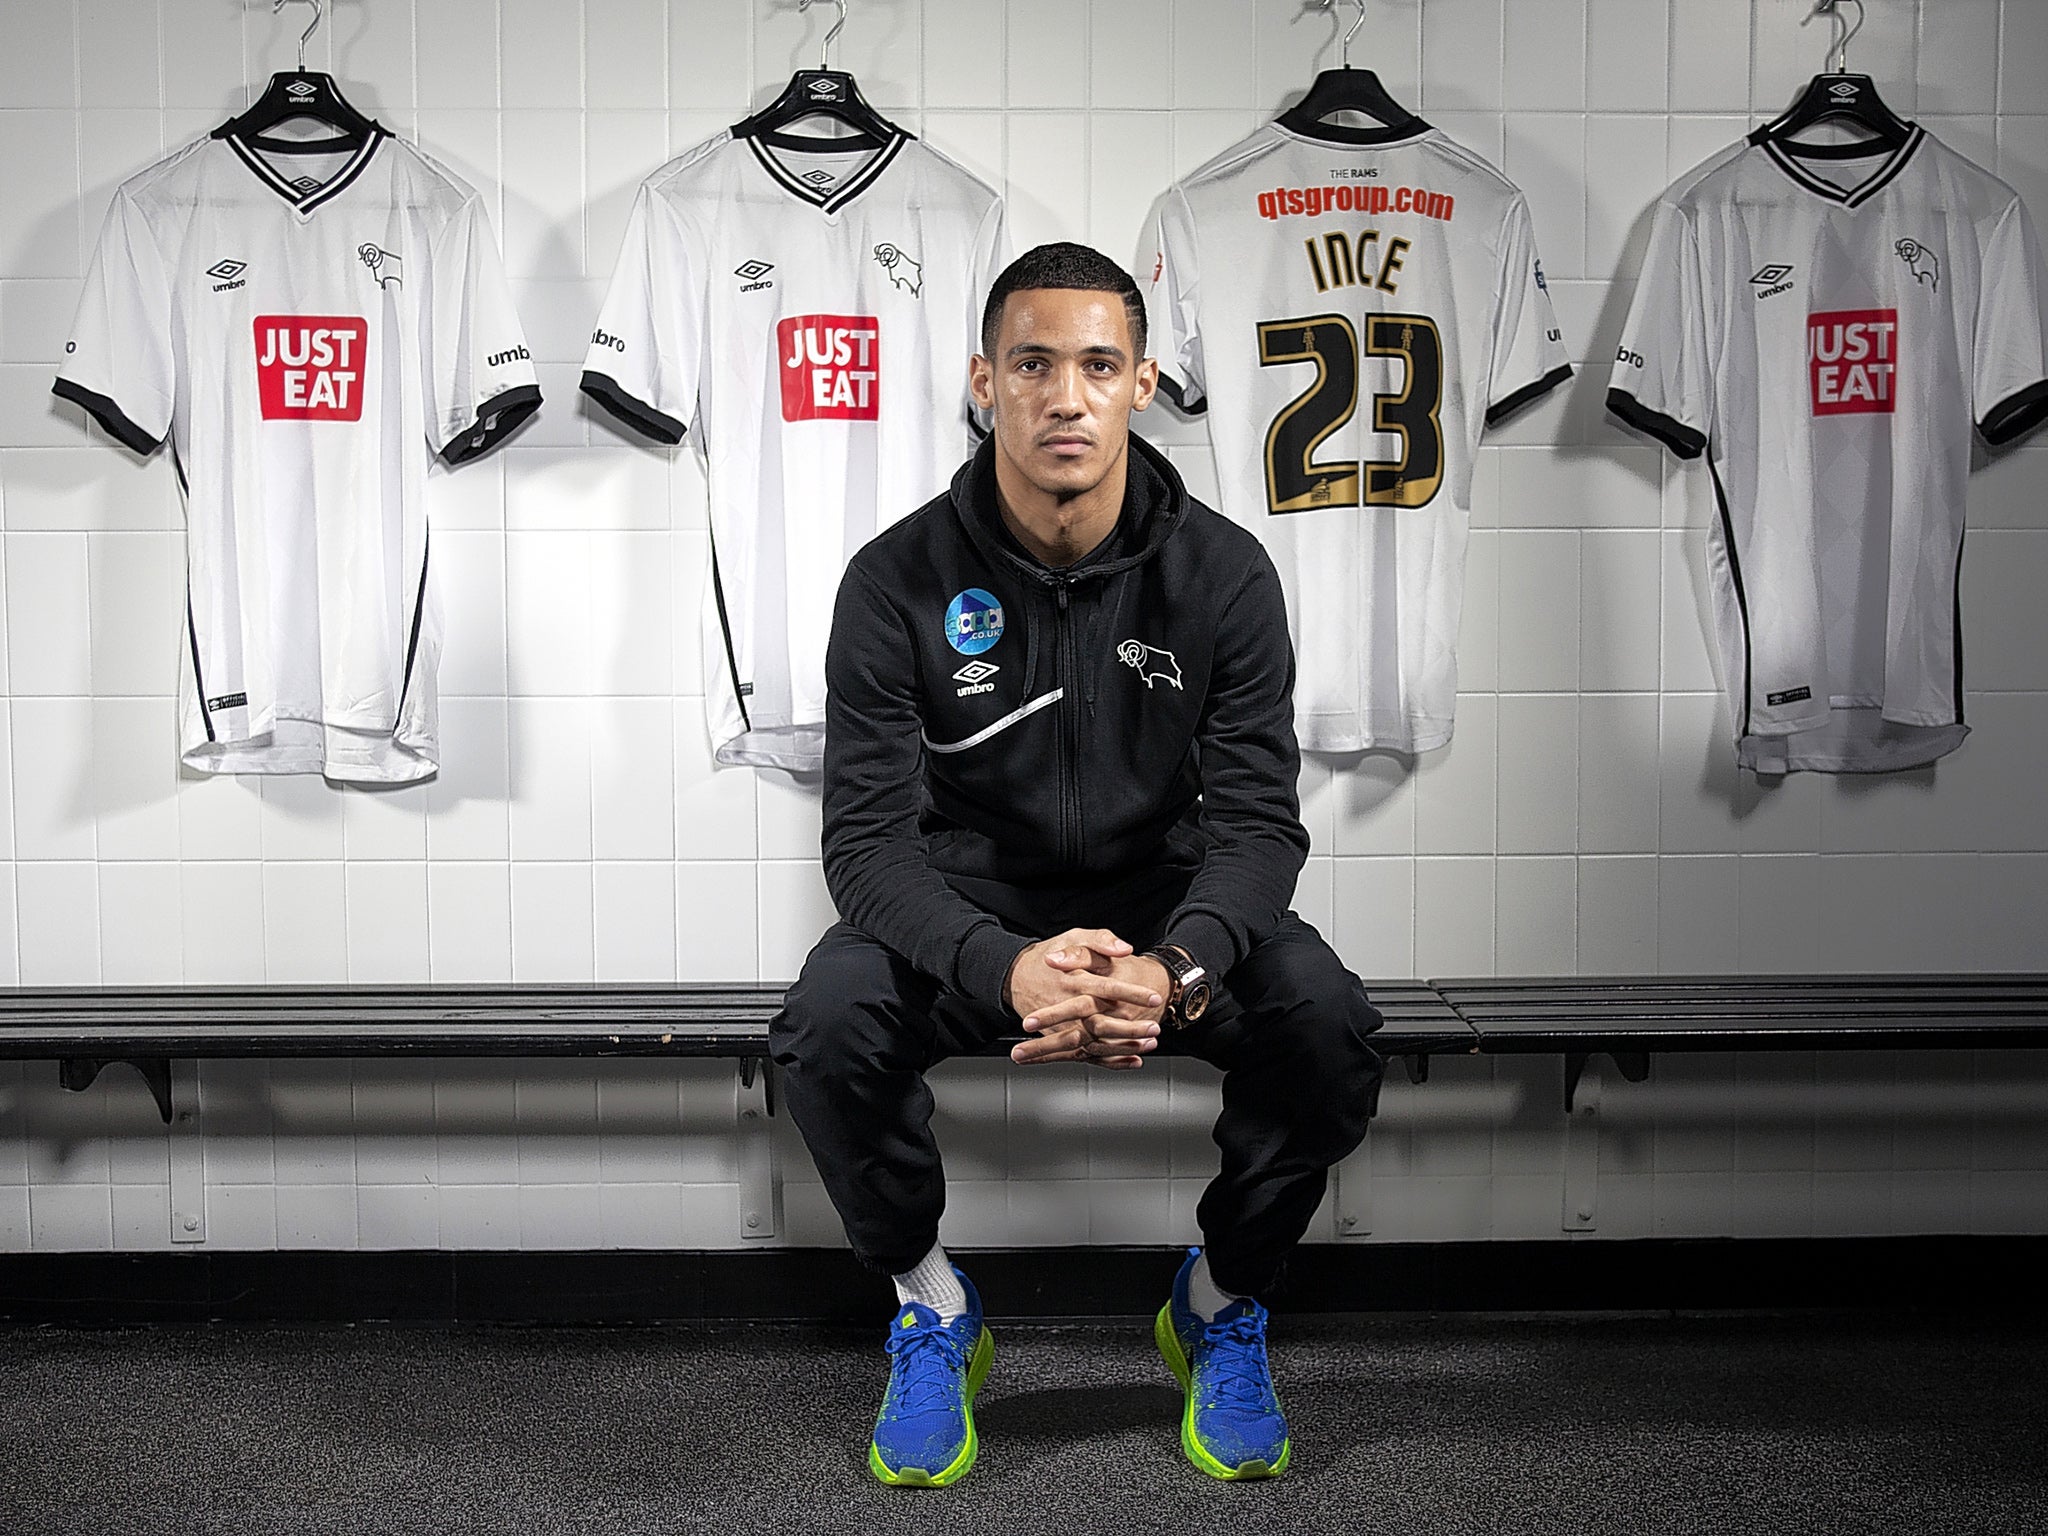 Derby ’s Tom Ince was born while his father, Paul, was playing for Manchester United